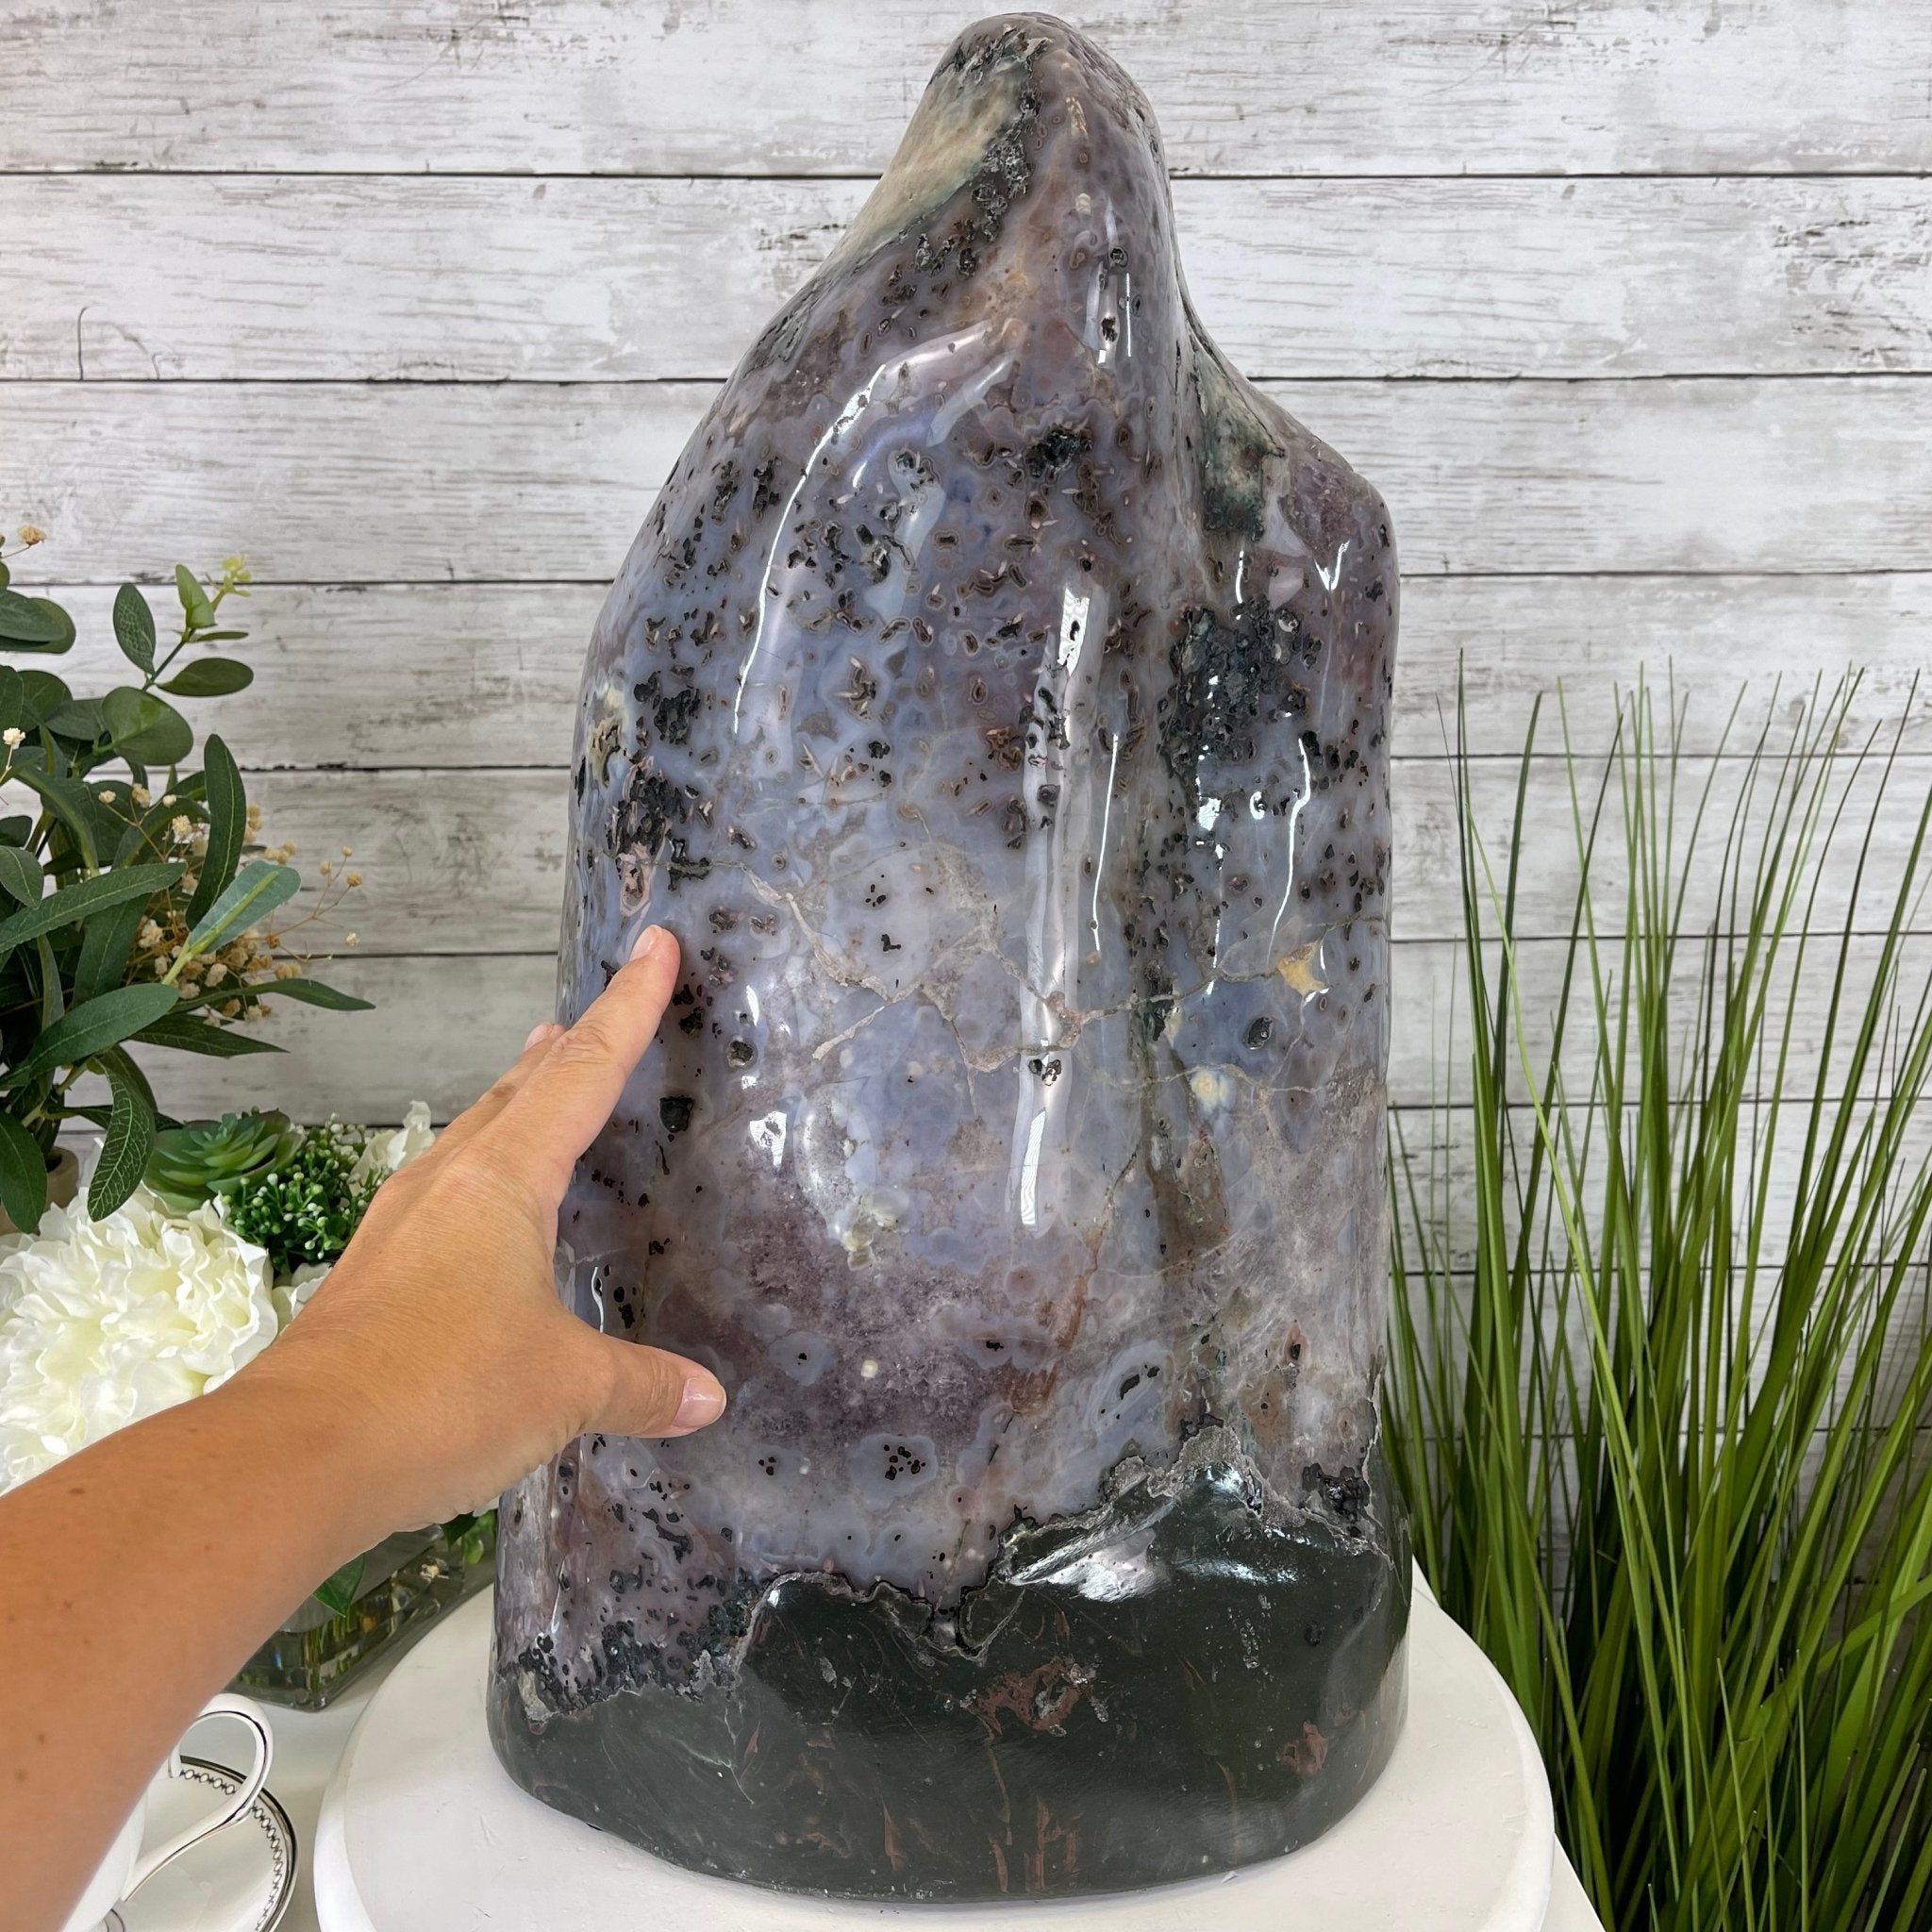 Extra Plus Quality Polished Brazilian Amethyst Cathedral, 53.9 lbs & 20" tall Model #5602-0053 by Brazil Gems - Brazil GemsBrazil GemsExtra Plus Quality Polished Brazilian Amethyst Cathedral, 53.9 lbs & 20" tall Model #5602-0053 by Brazil GemsPolished Cathedrals5602-0053